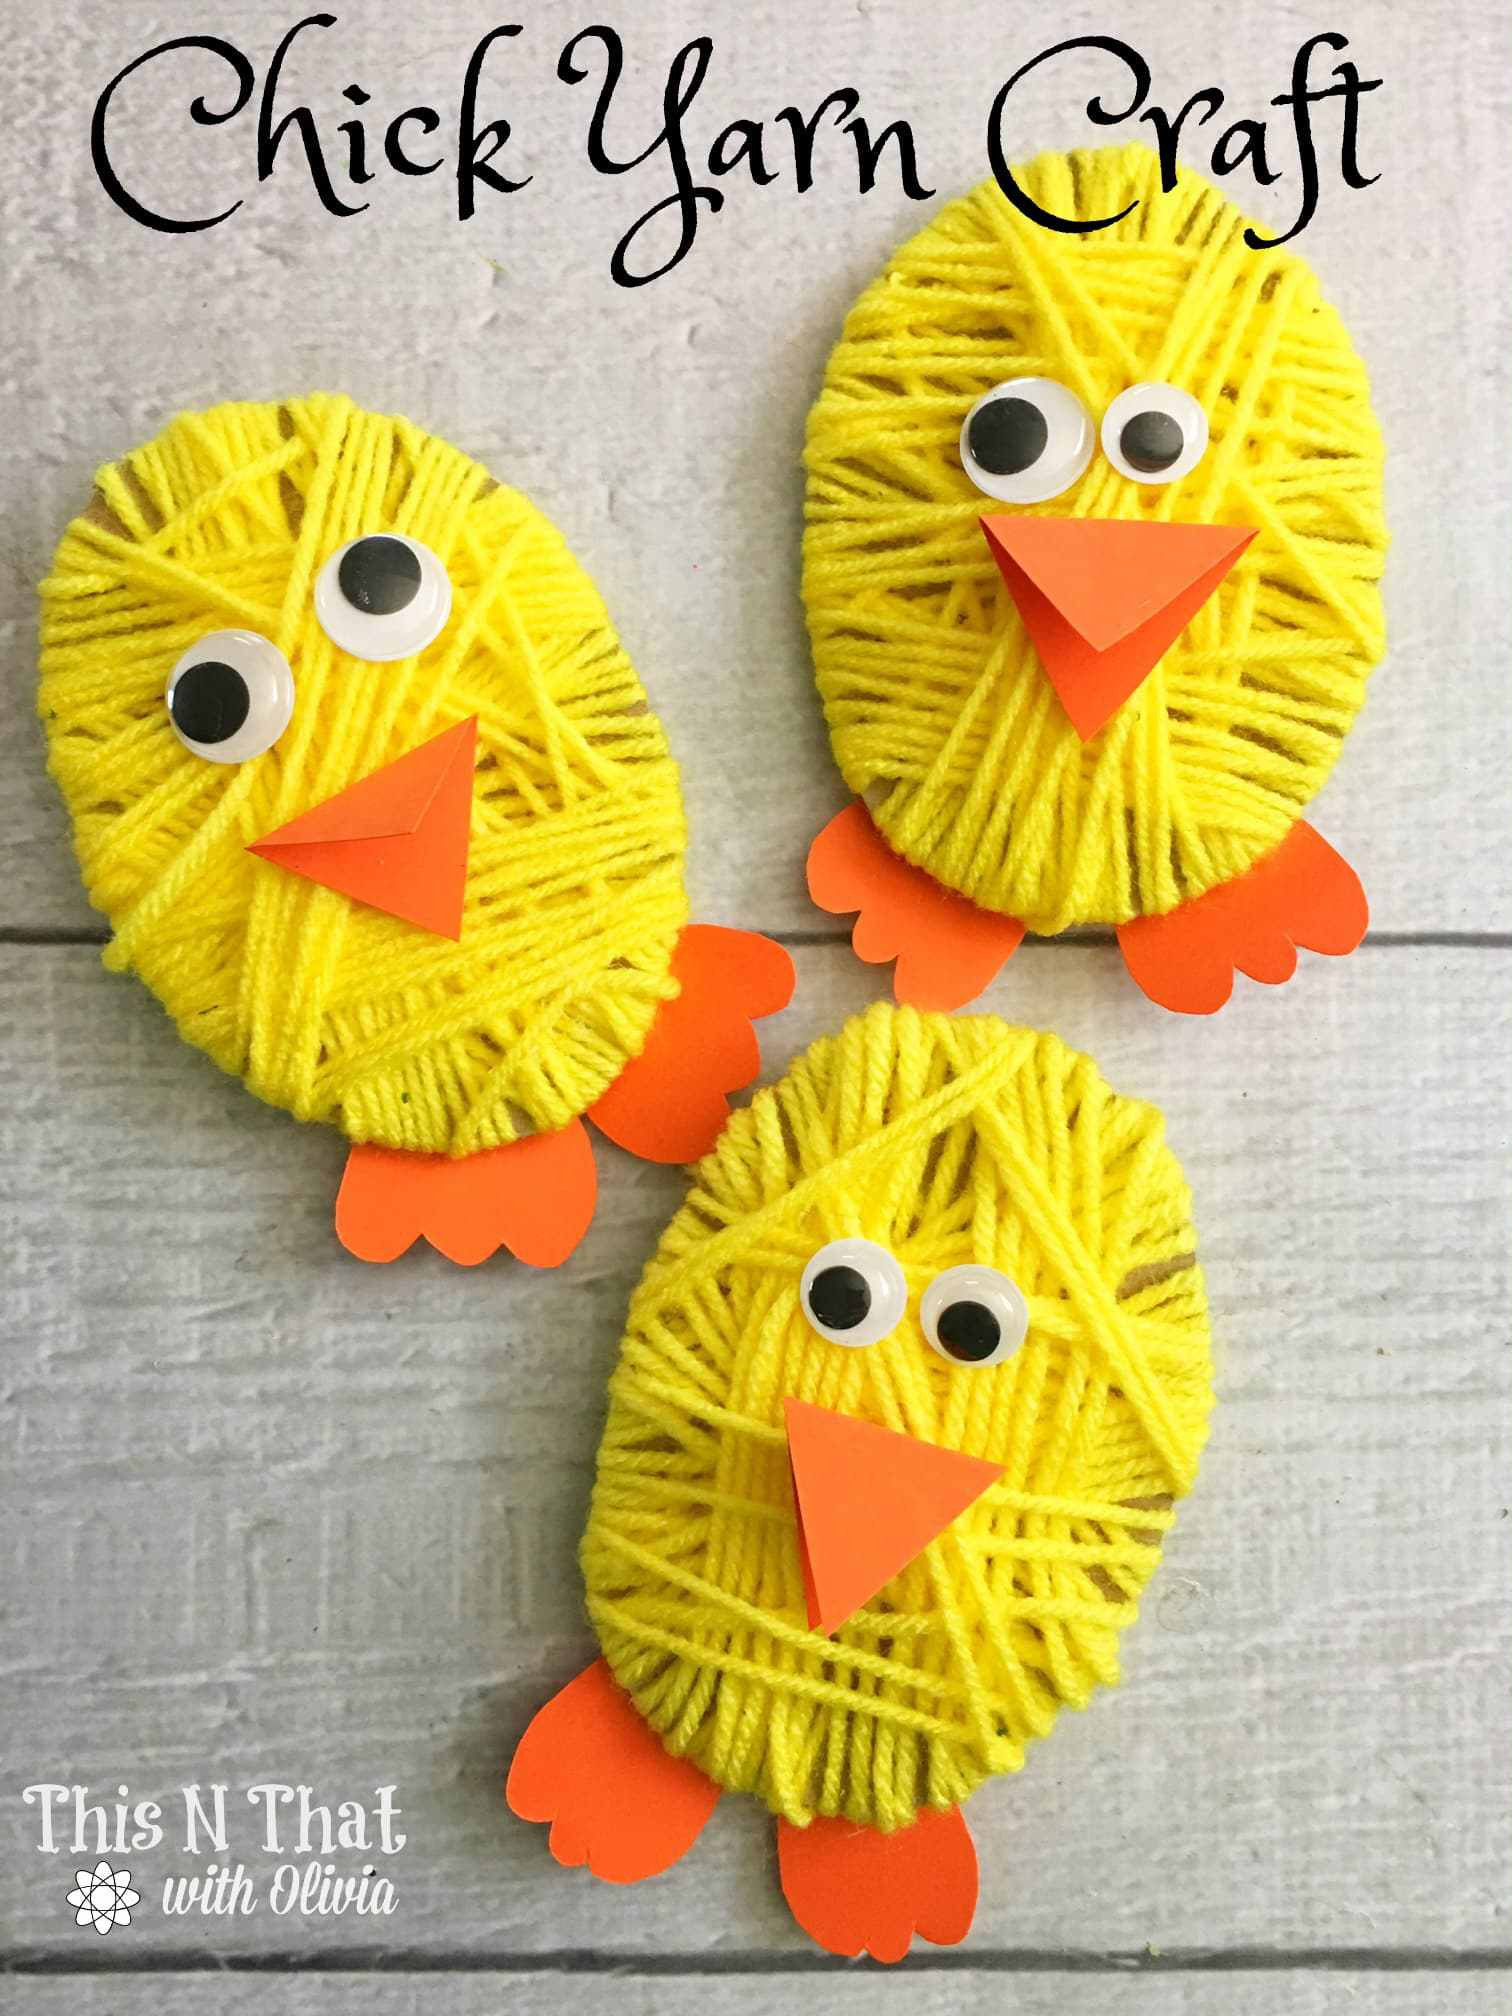 DIY Arts And Crafts For Kids
 Over 33 Easter Craft Ideas for Kids to Make Simple Cute